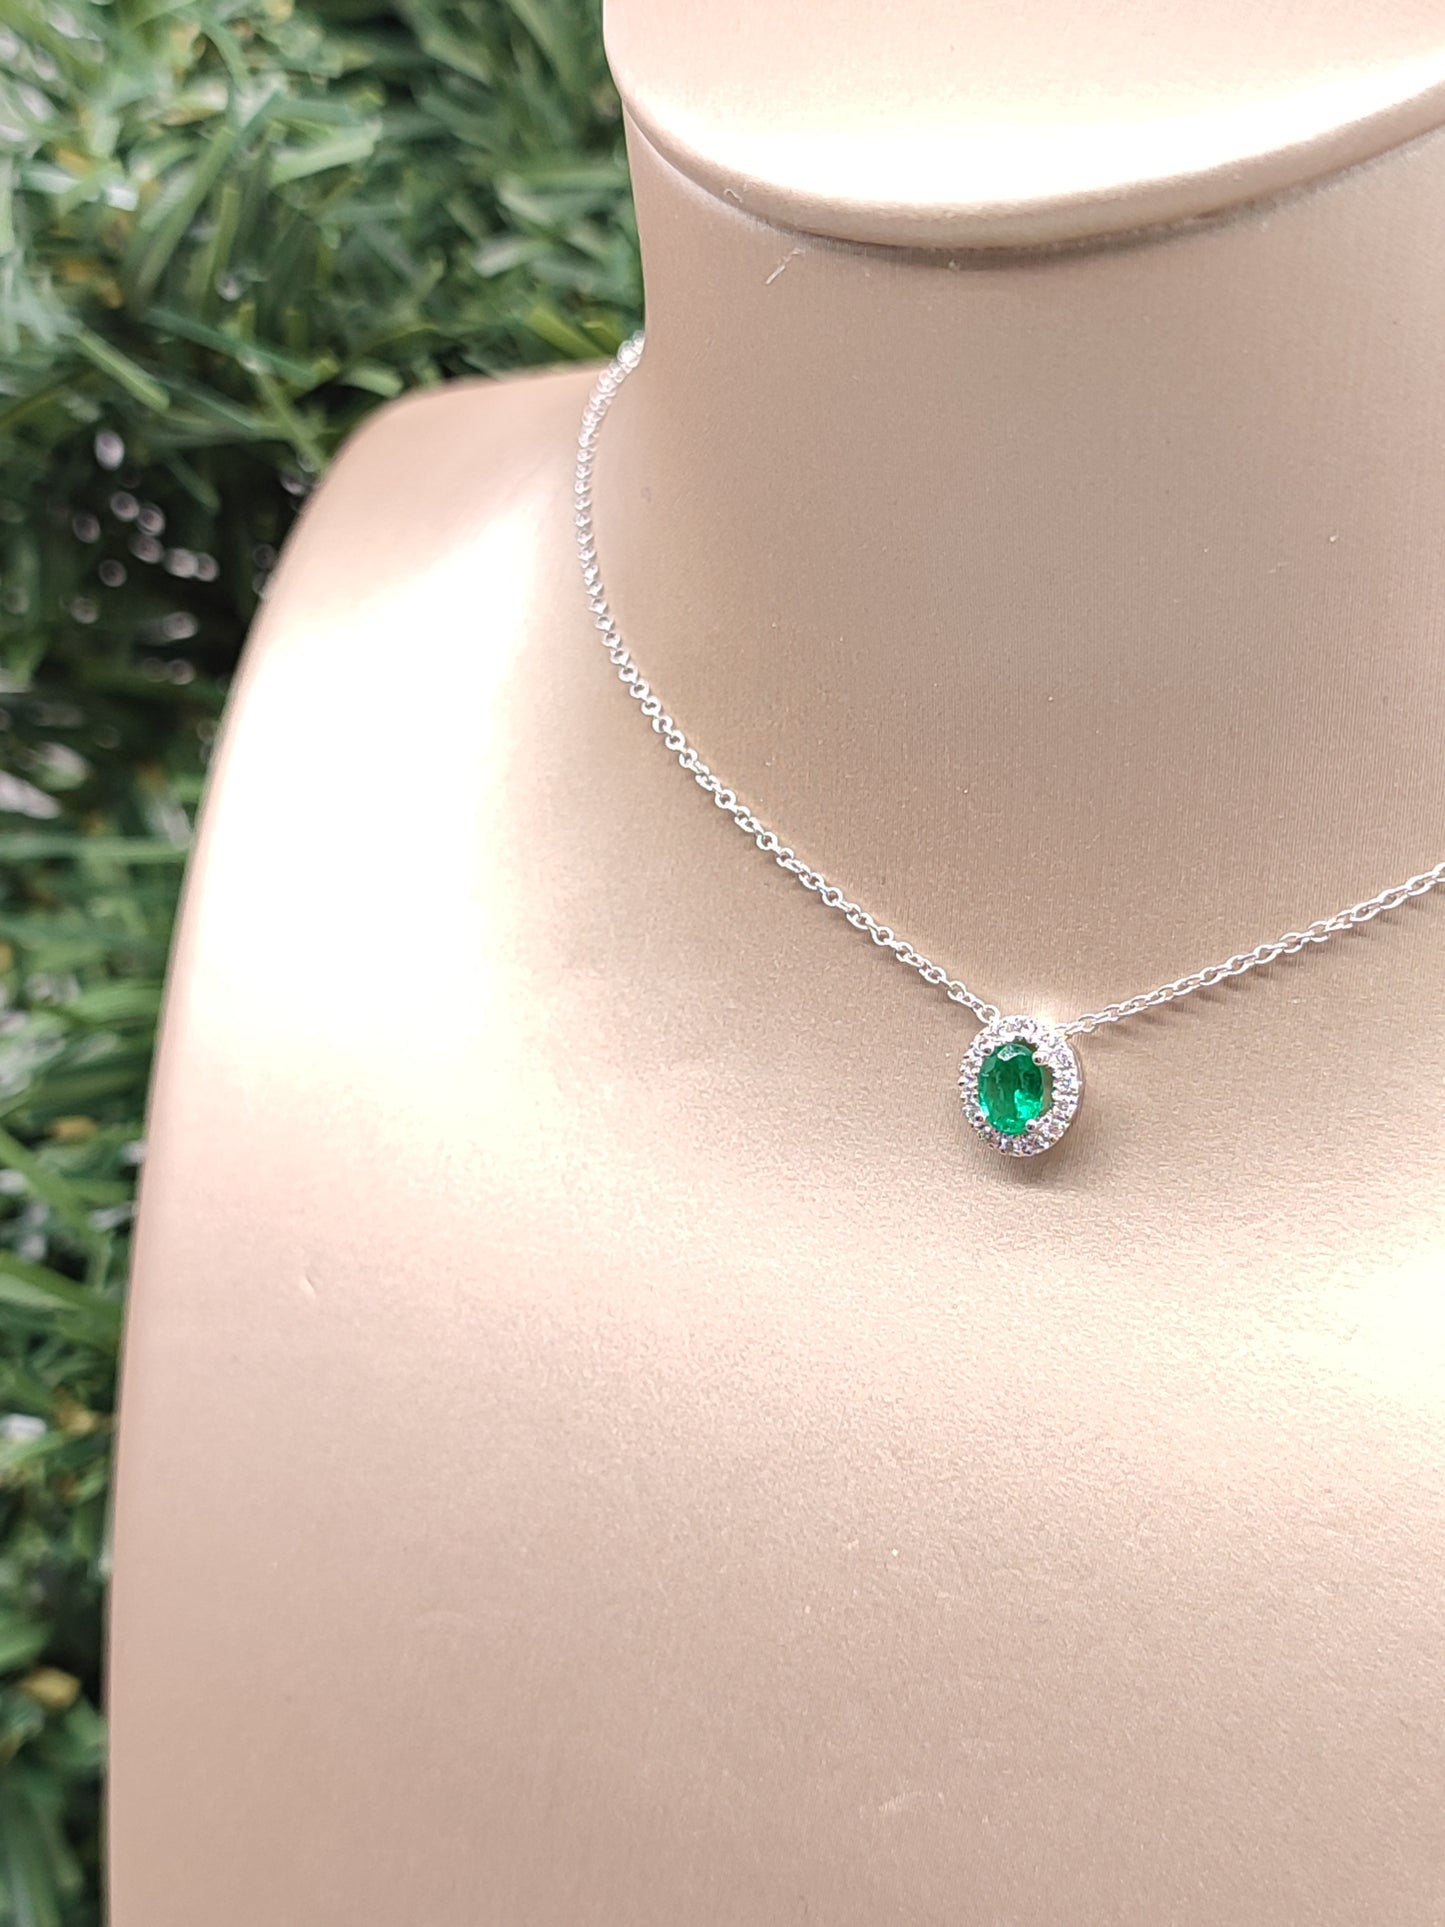 White gold necklace with emerald